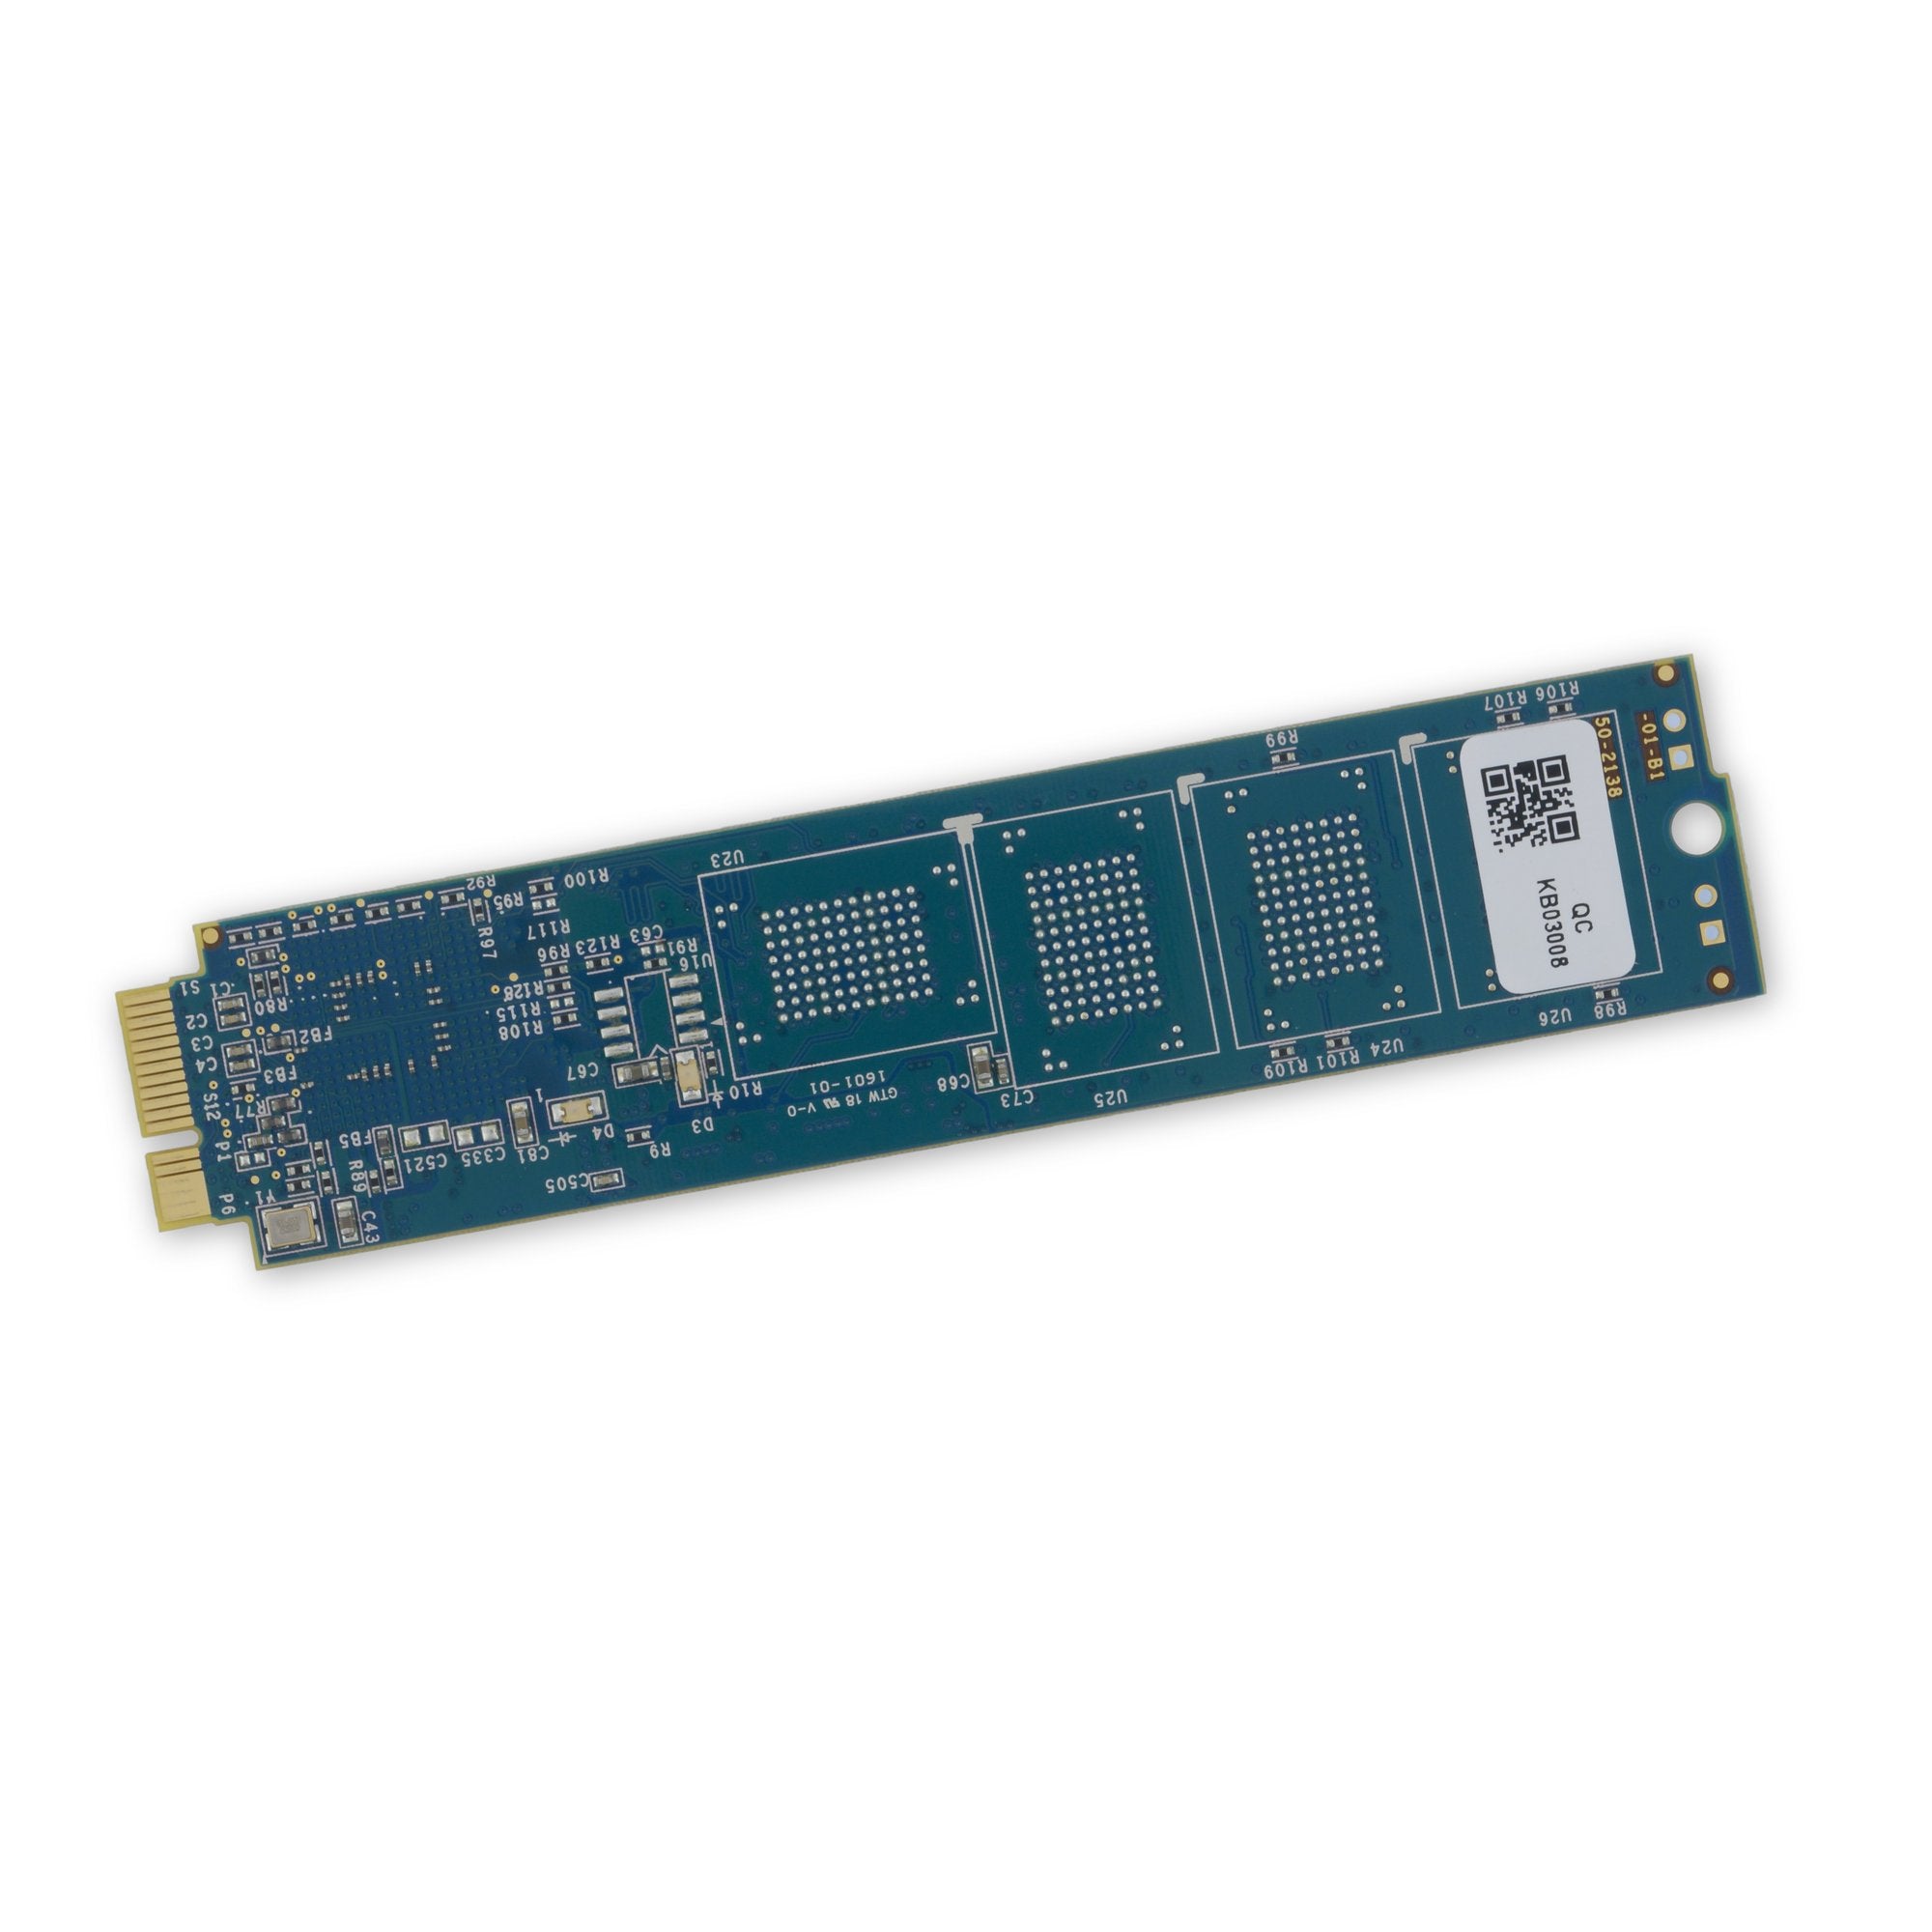 OWC Aura Pro SSD for MacBook Air 11" and 13" (Late 2010-Mid 2011)